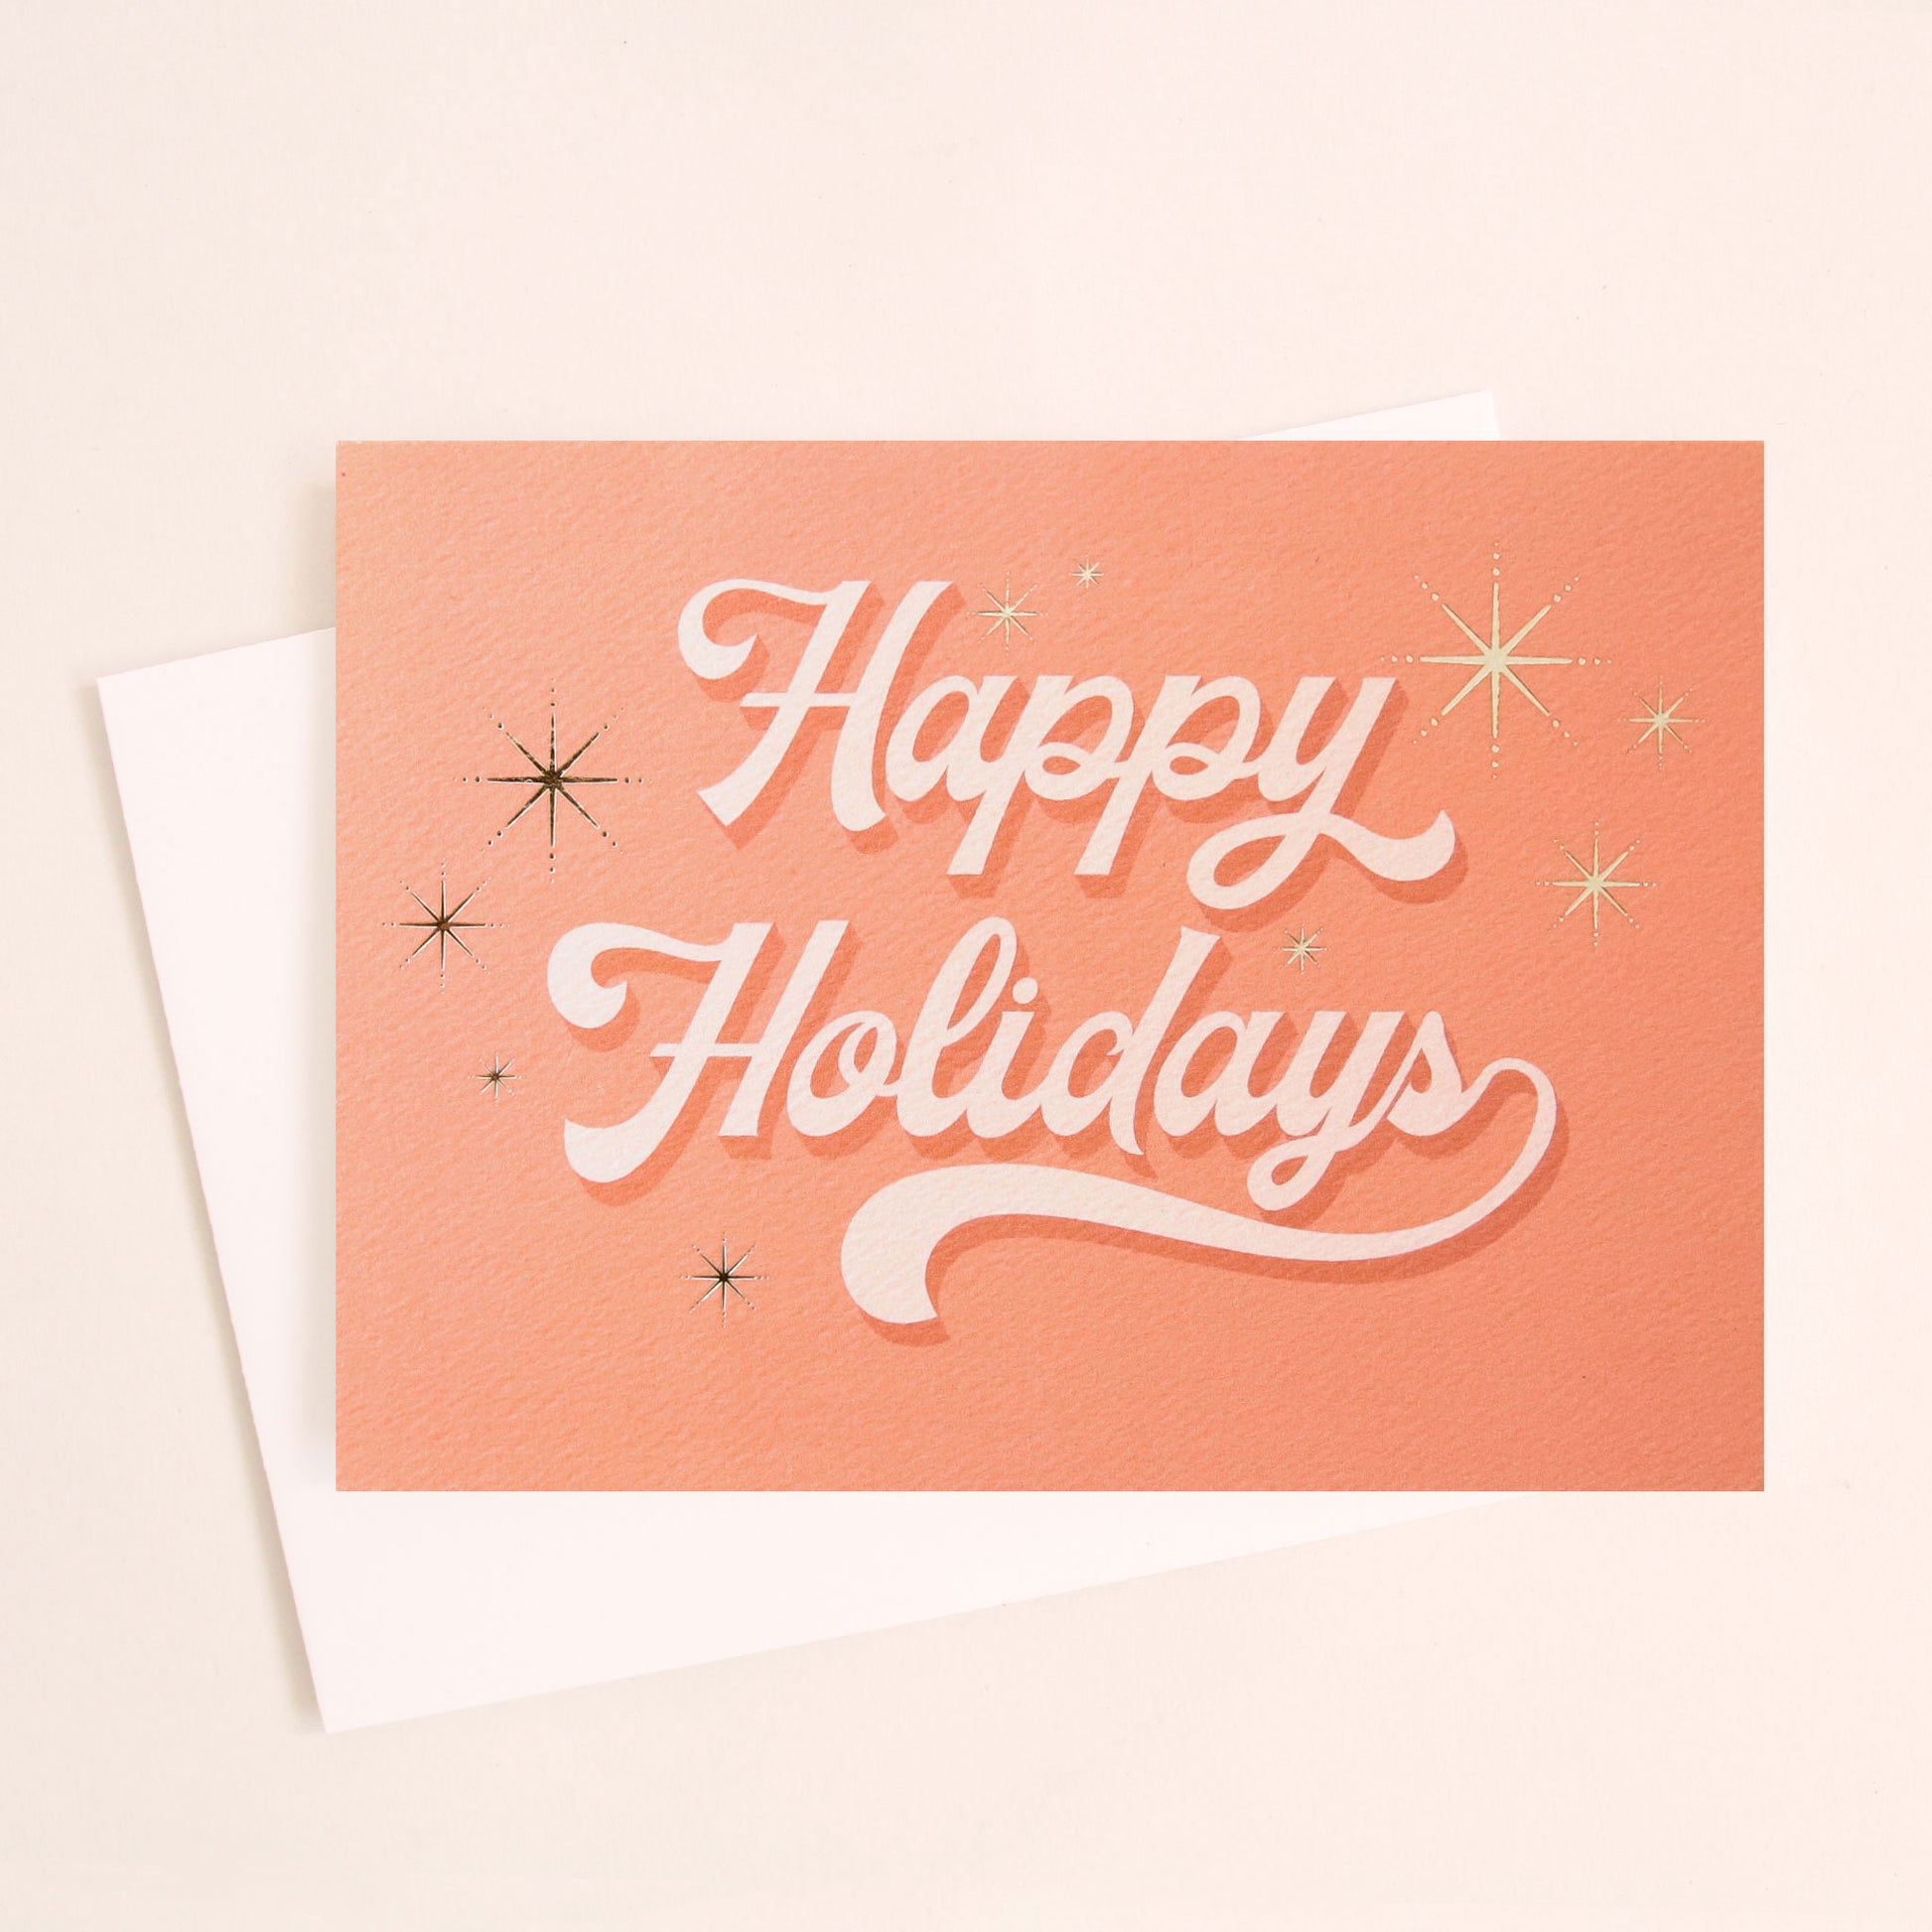 Pink greeting card with white cursive text that reads happy holidays surrounded by six gold foil starbursts. The card is accompanied by a solid white envelope.